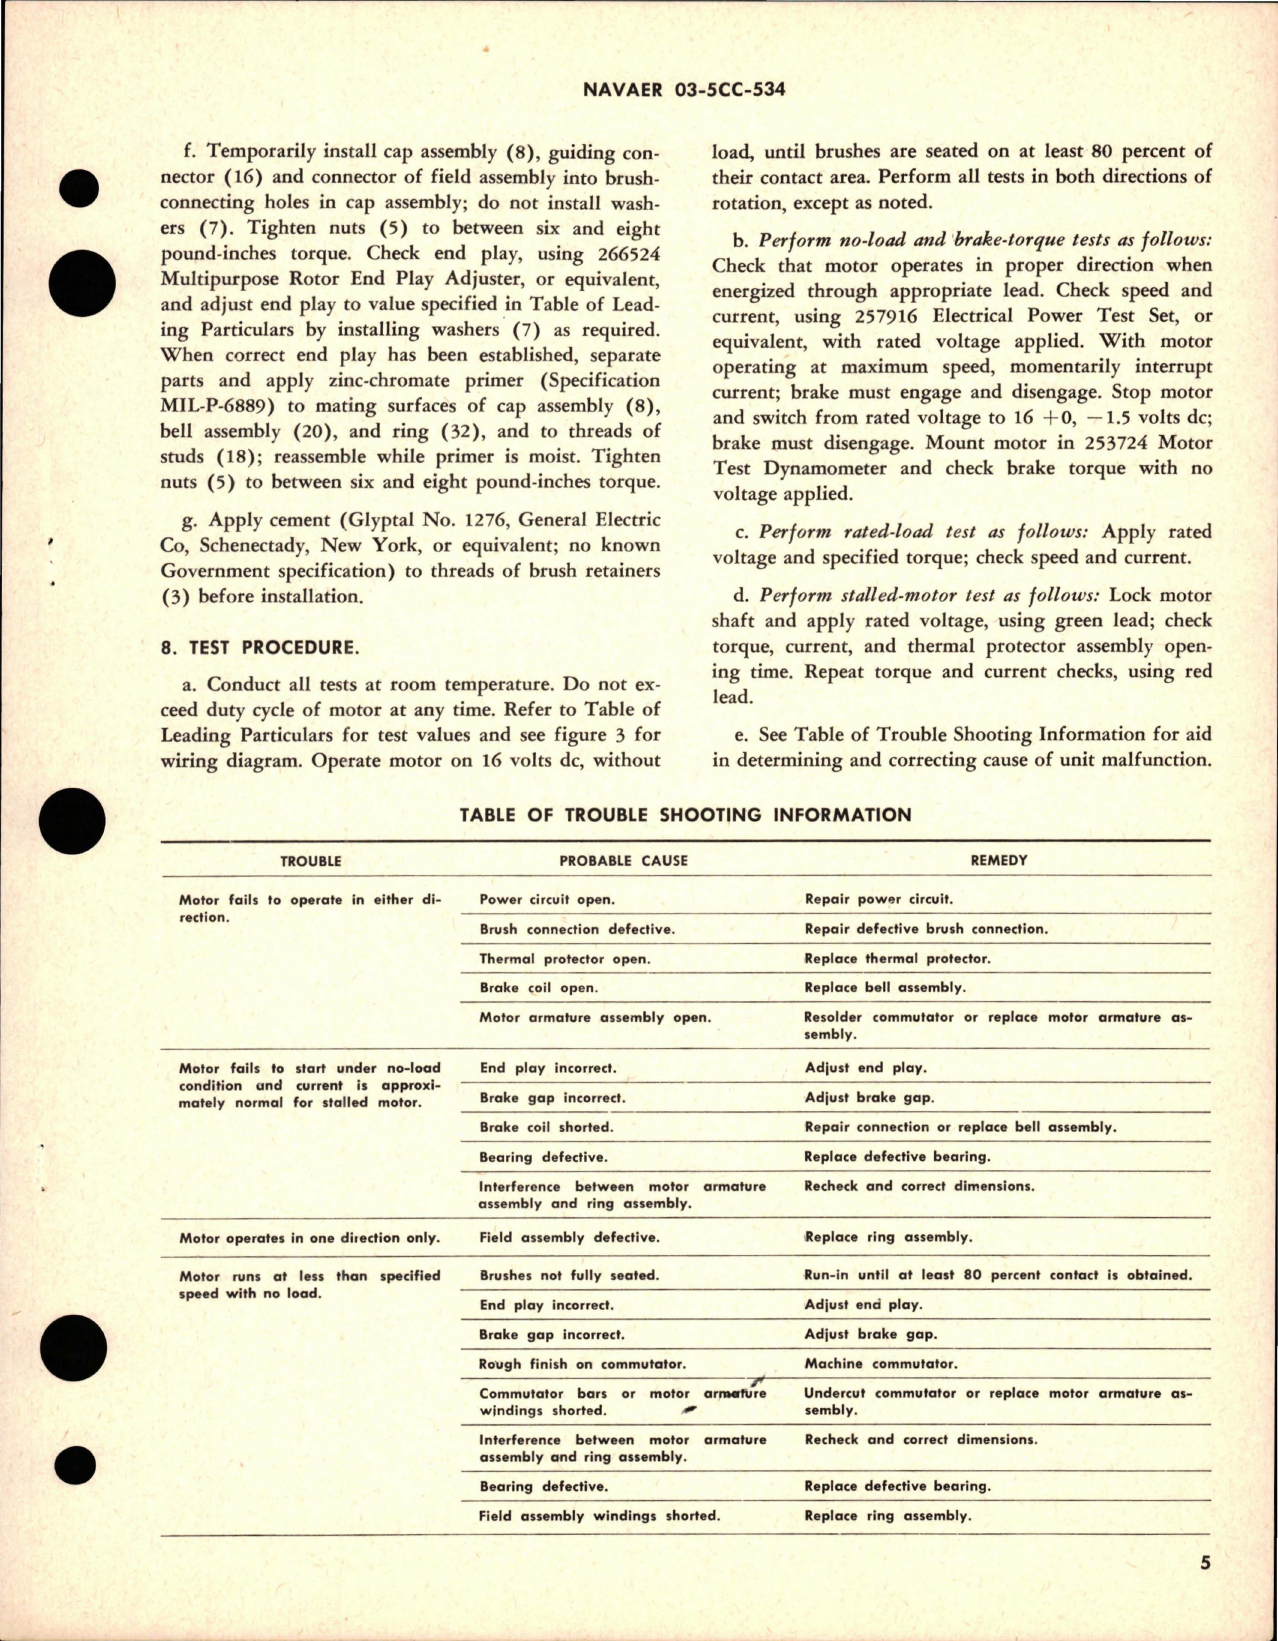 Sample page 5 from AirCorps Library document: Overhaul Instructions with Parts Breakdown for Direct-Current Motor 0.035 HP - Part 32718 - Model DCM15-89-1